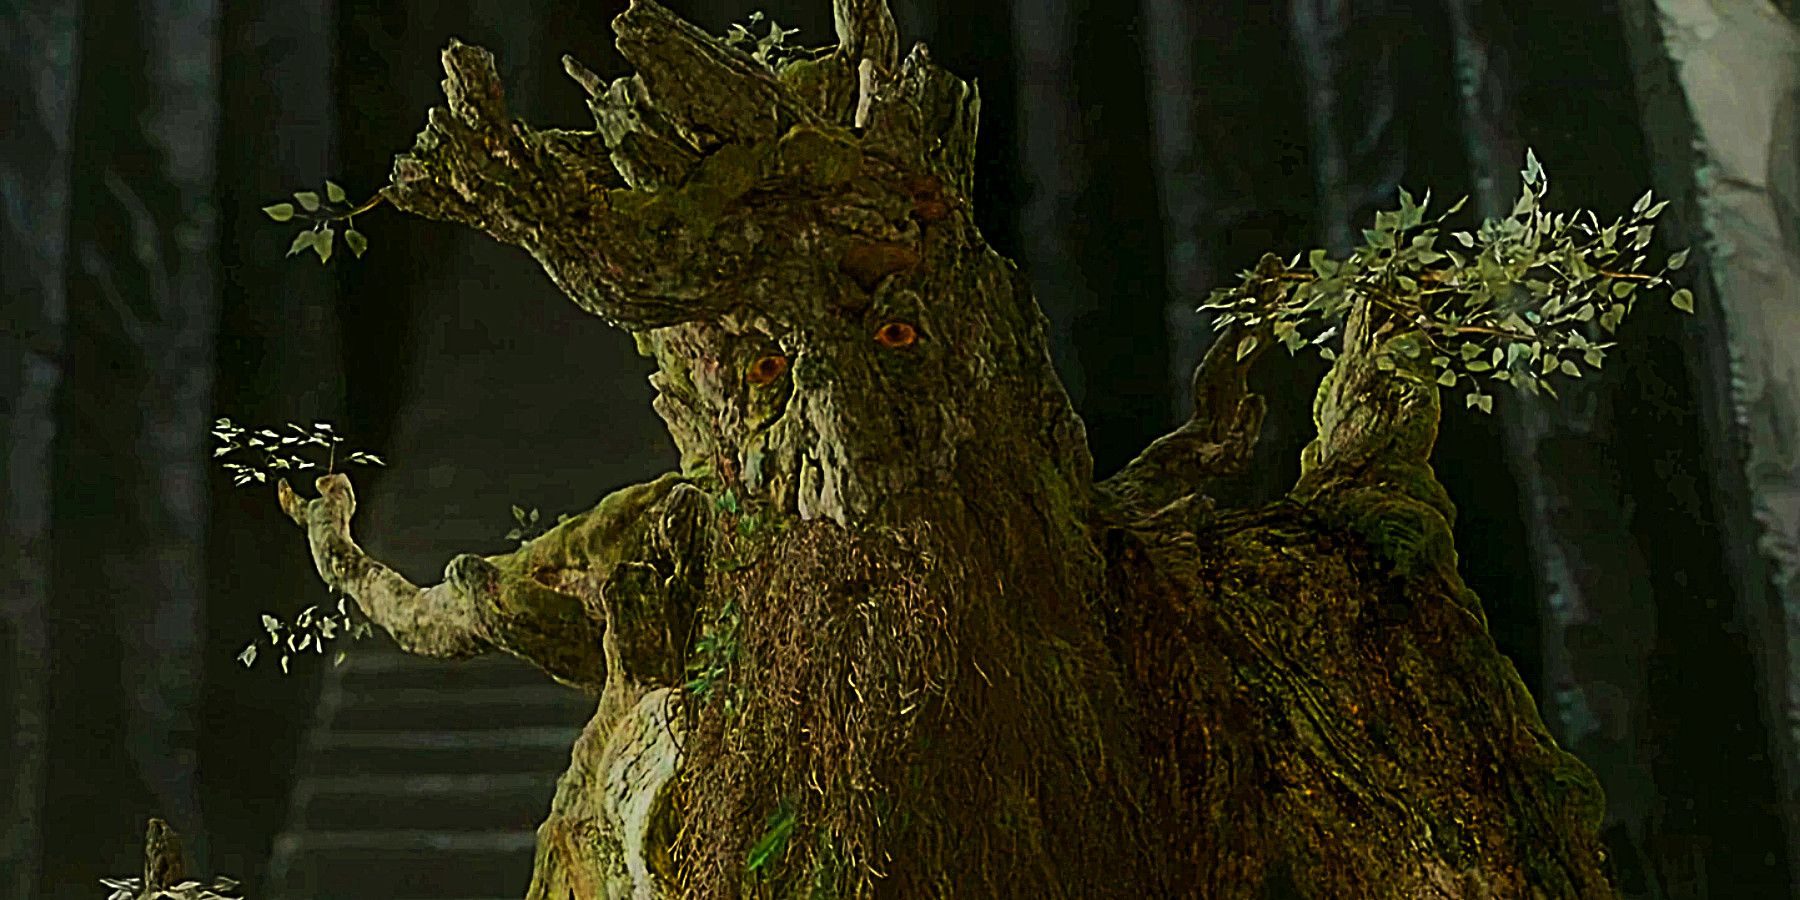 lord-of-the-rings-ents-feature-treebeard-picture-bright-9507620